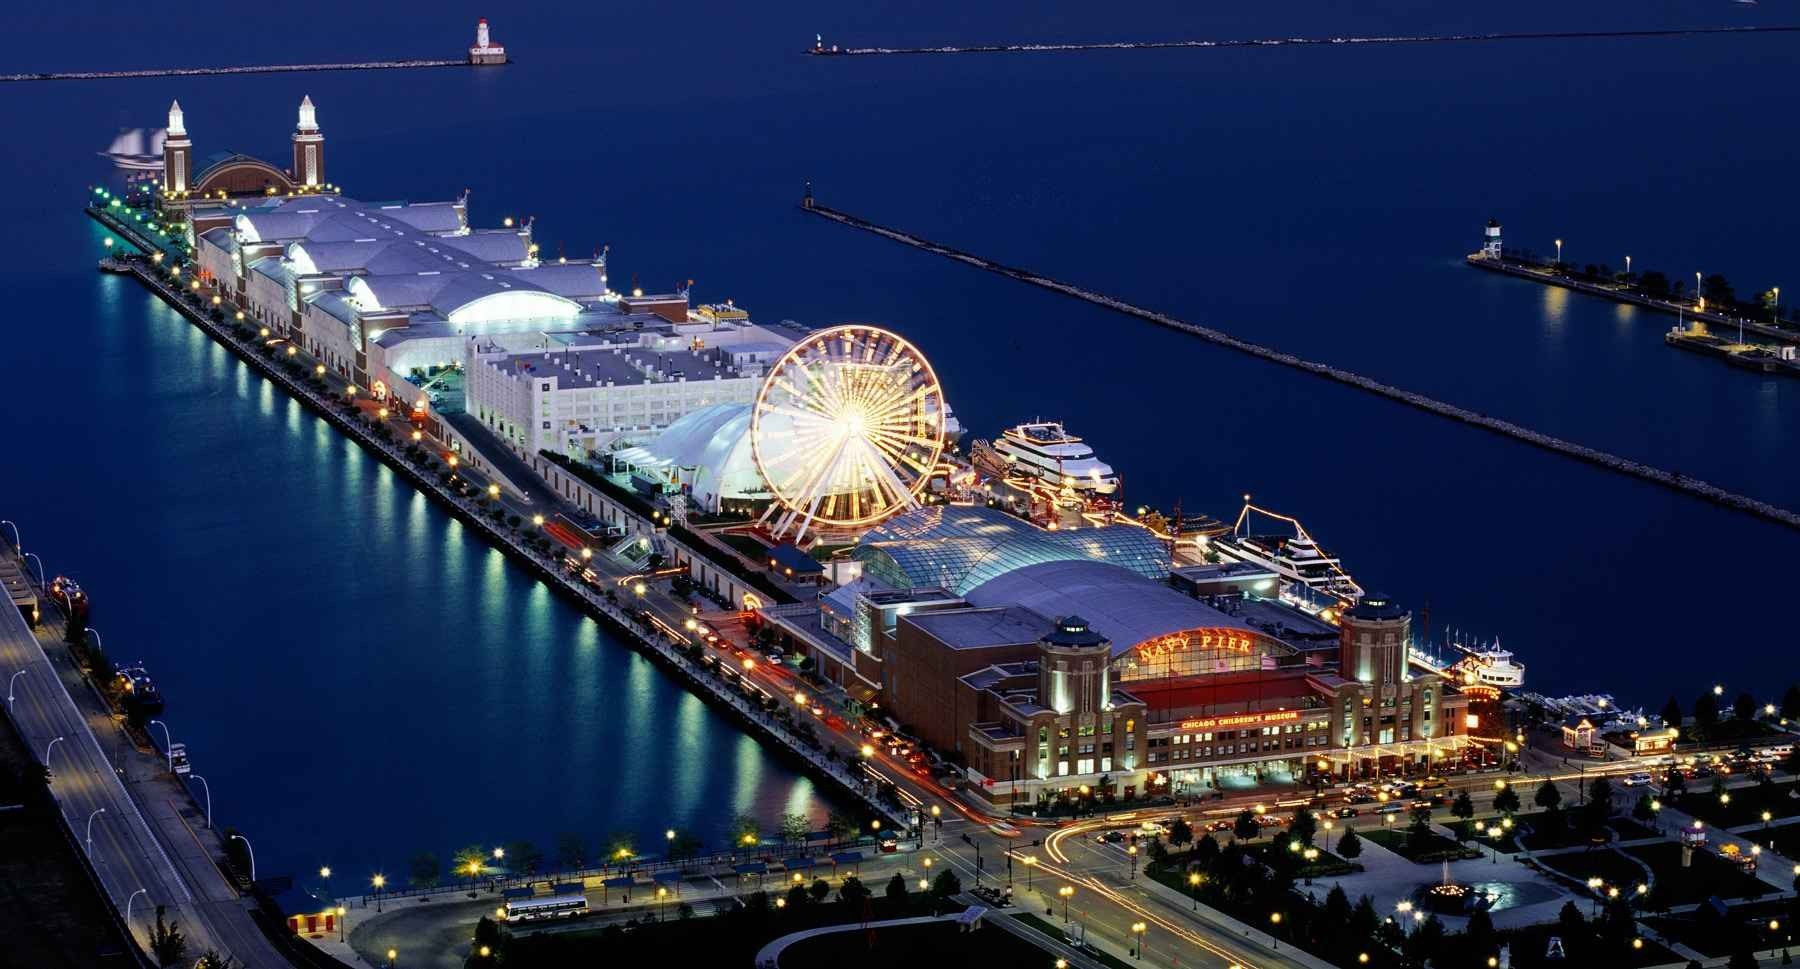 The best theme parks in Chicago .. Enjoy the theme - The best theme parks in Chicago .. Enjoy the theme parks